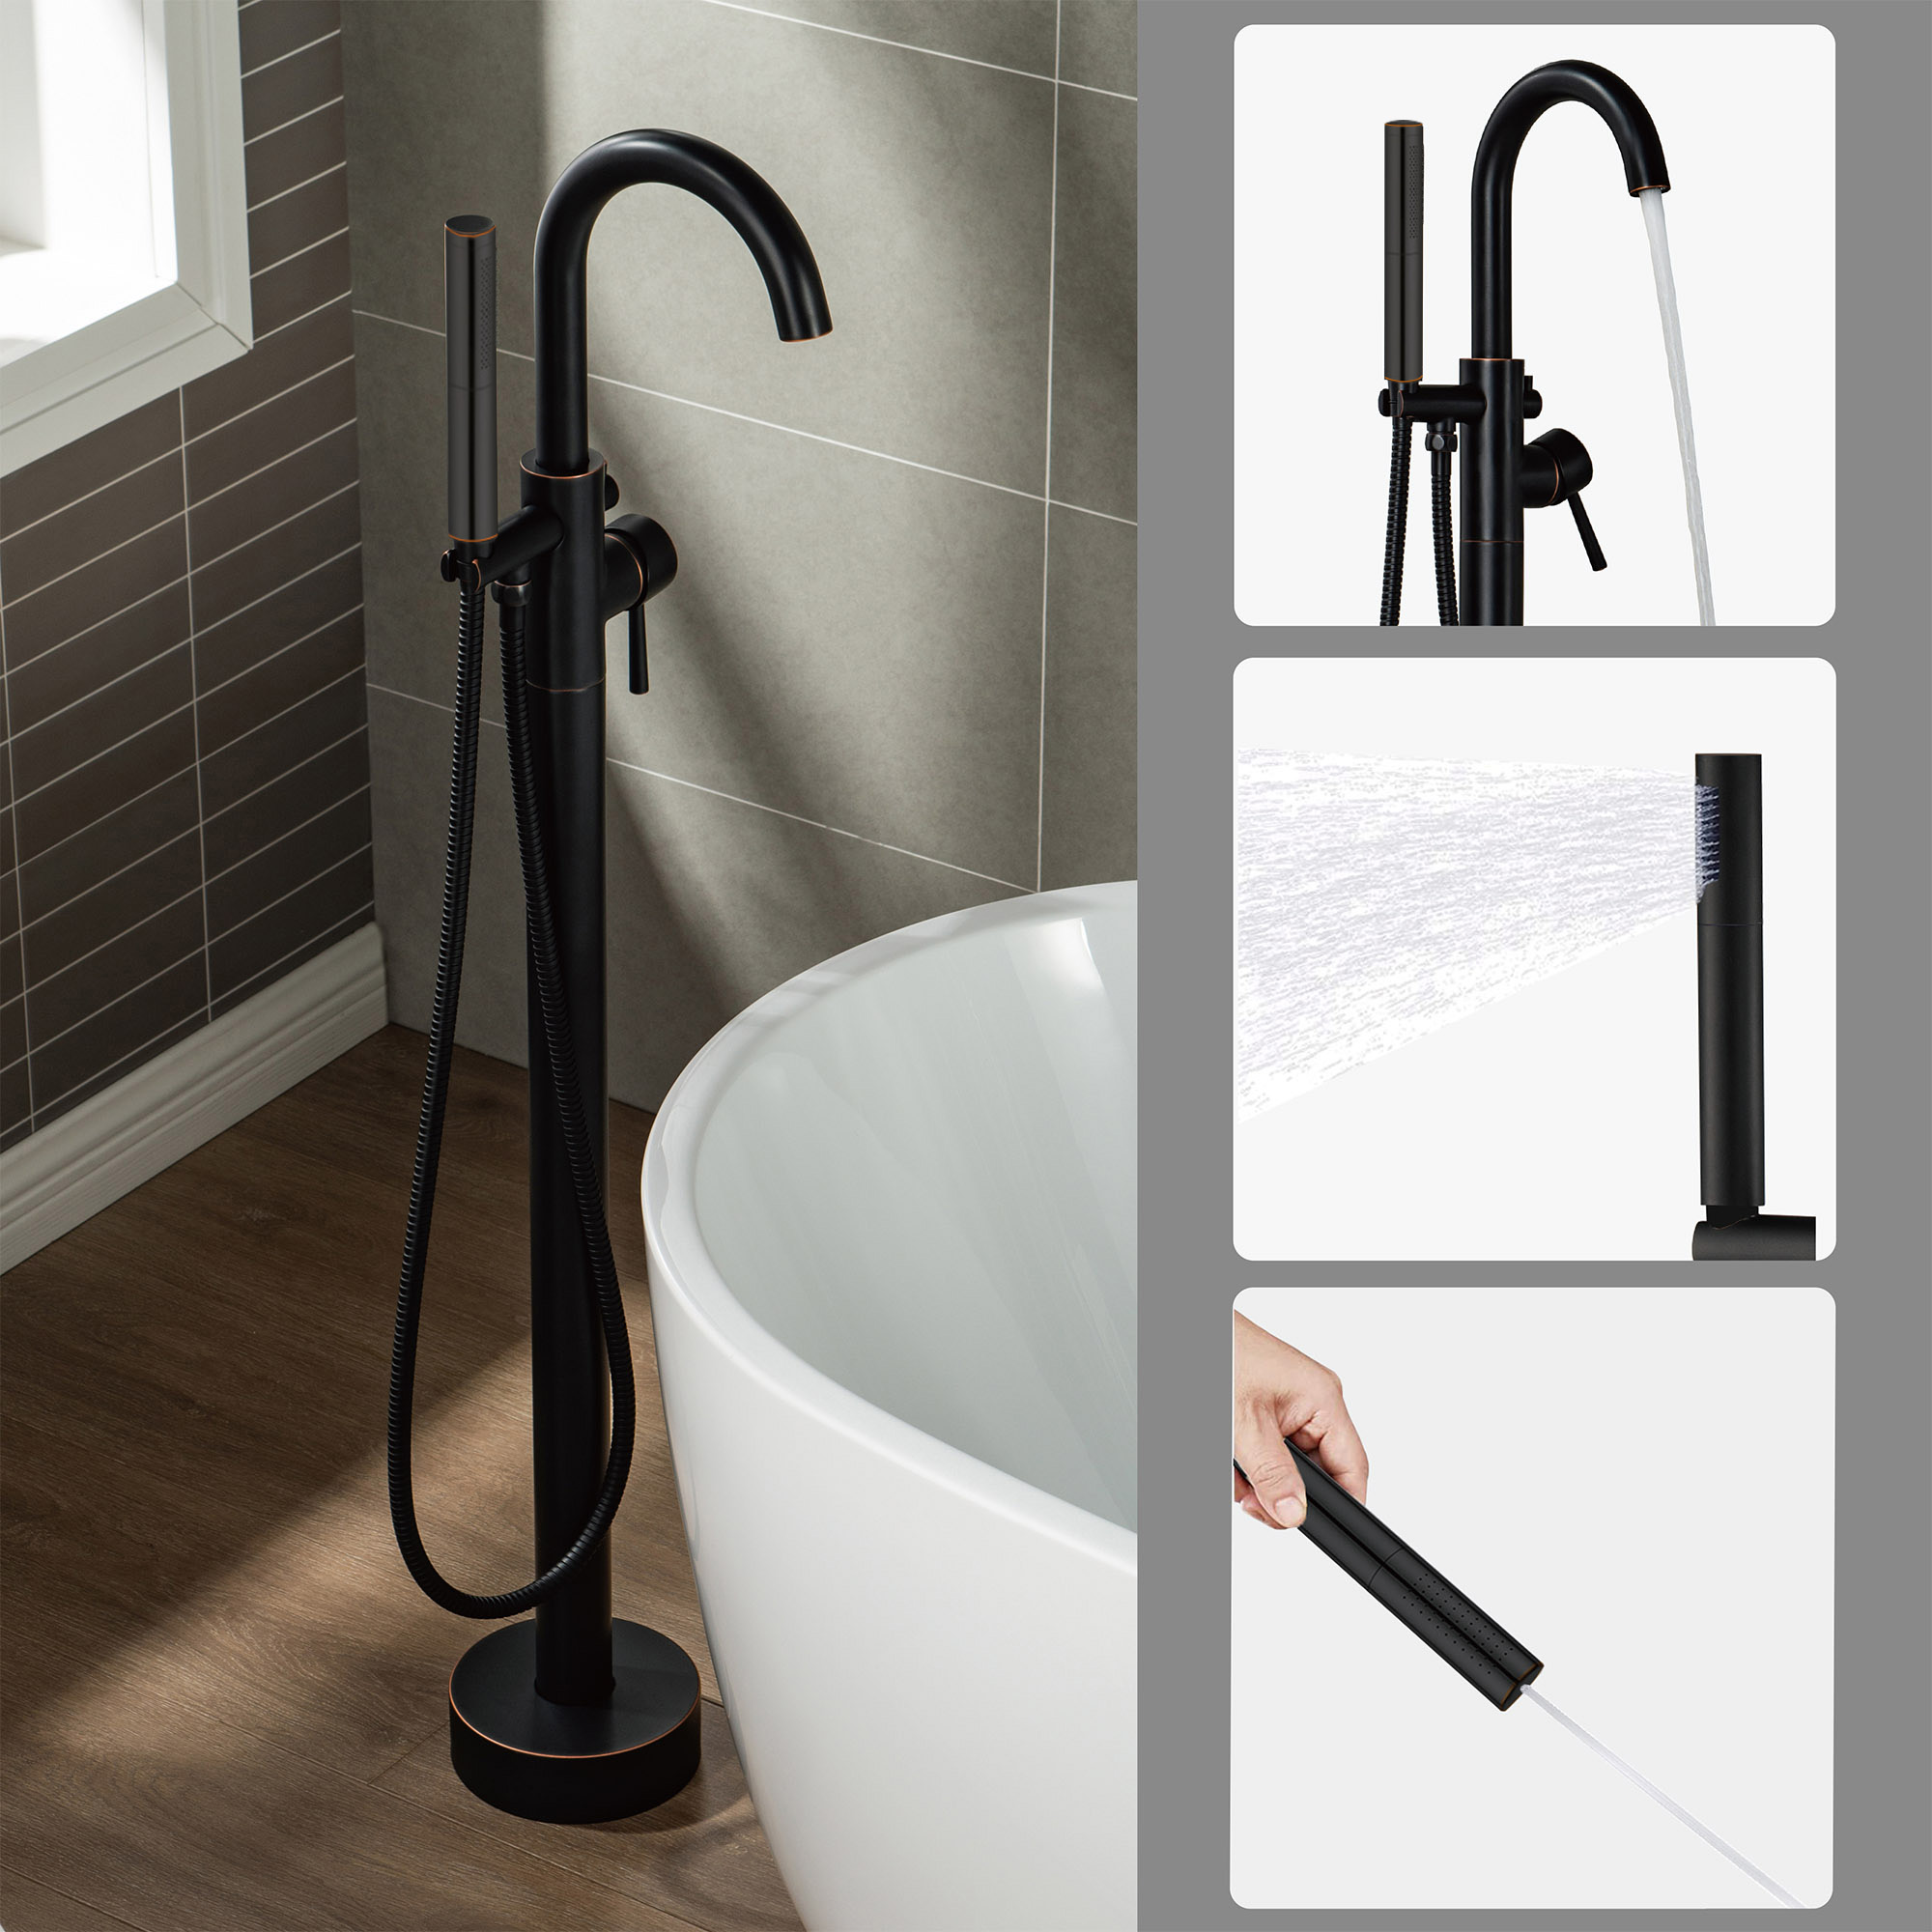  WOODBRIDGE F0010ORBDR Contemporary Single Handle Floor Mount Freestanding Tub Filler Faucet with Hand shower in Oil Rubbed Bronze Finish._14266